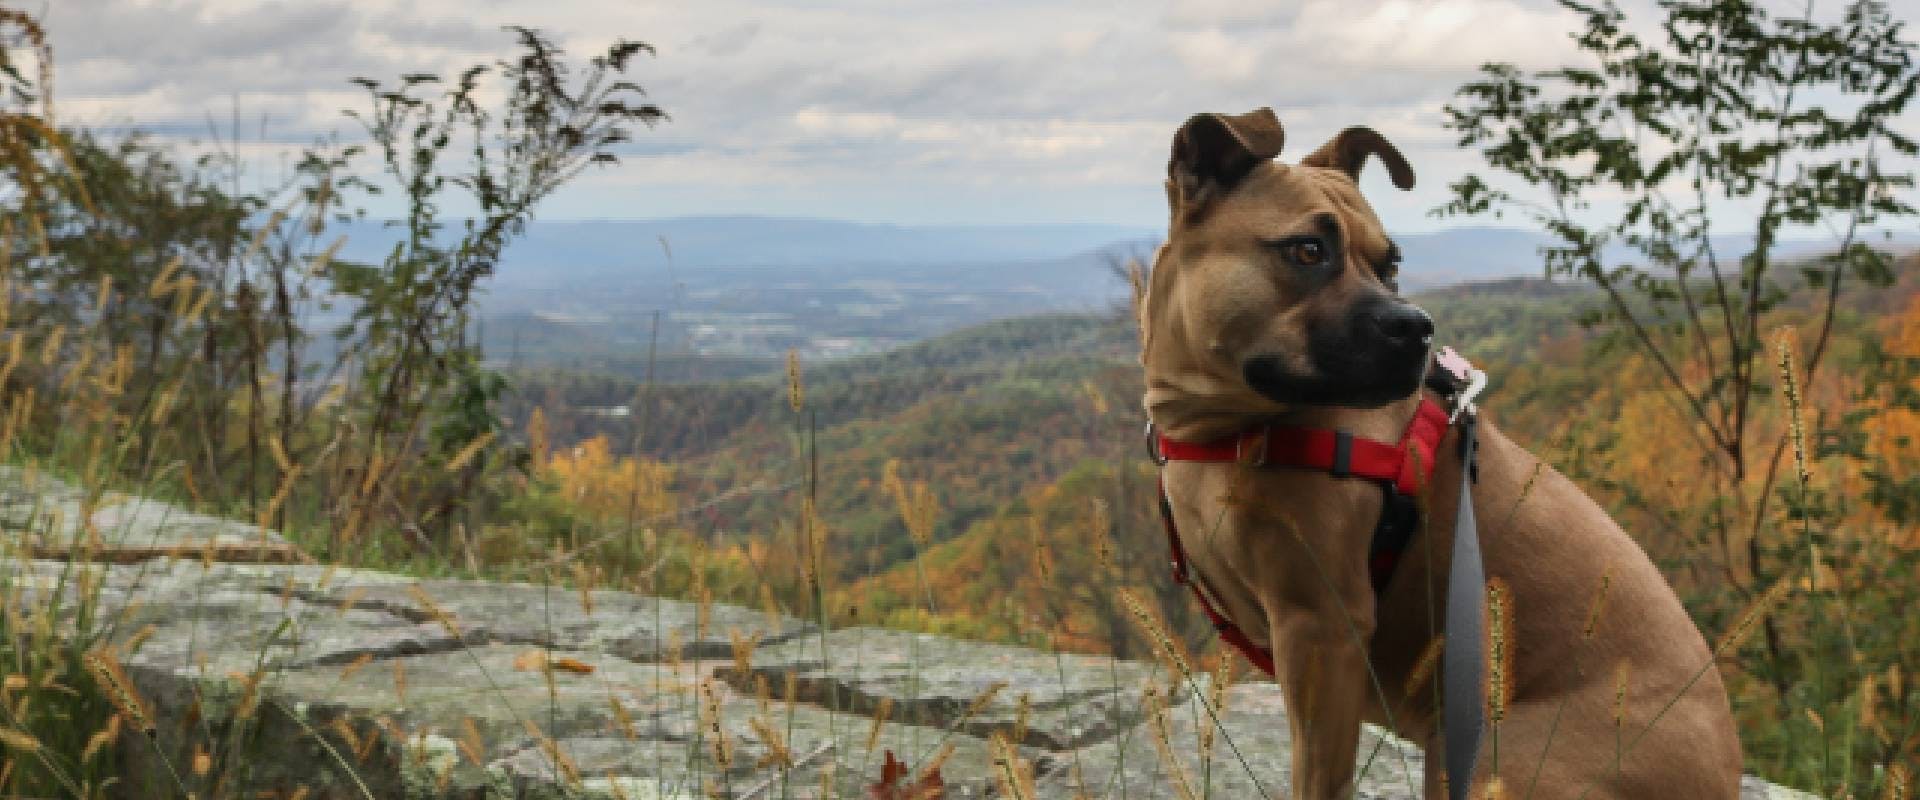 are companion dogs allowed in national parks